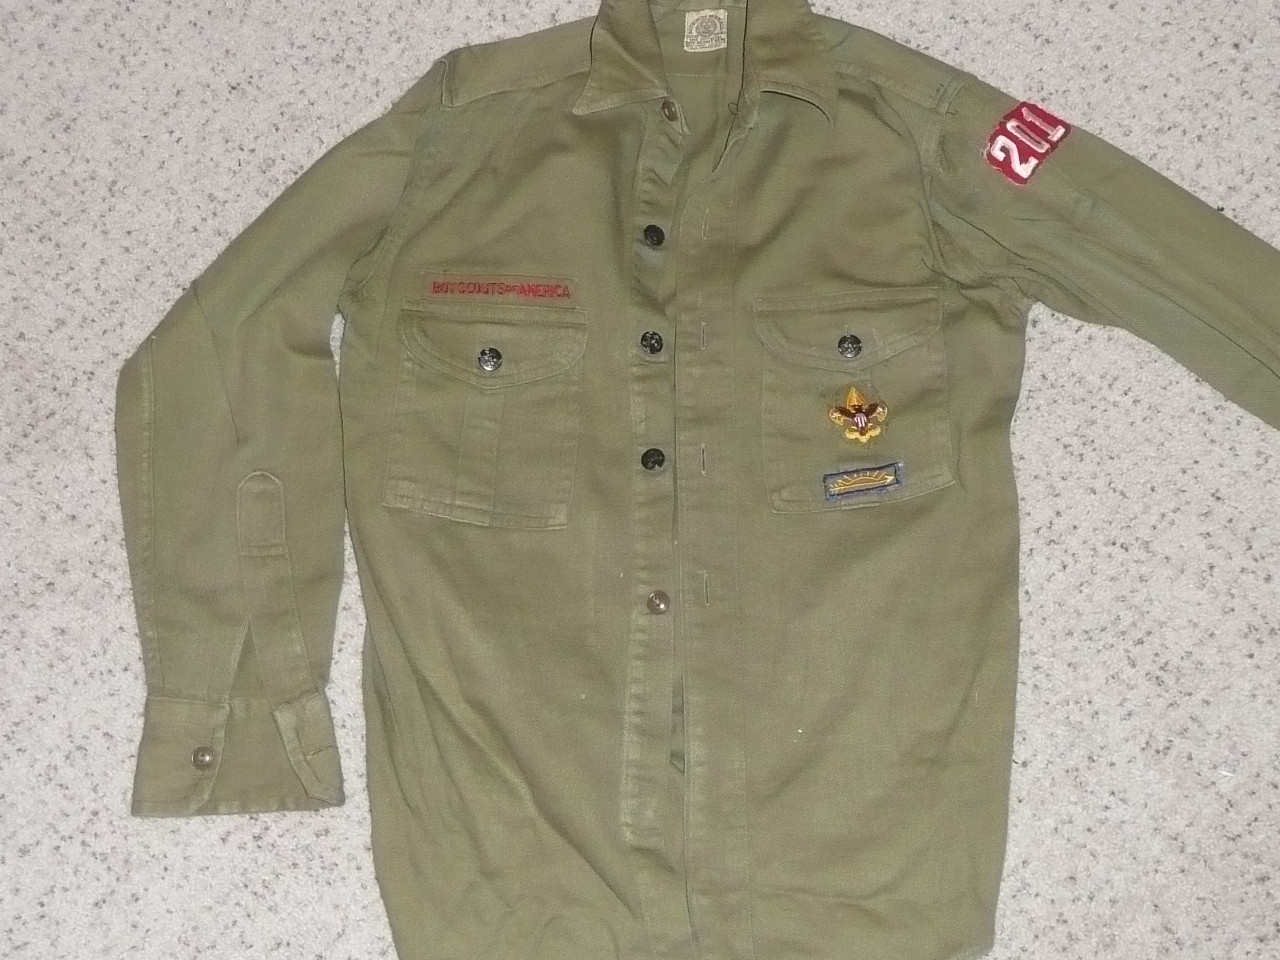 1950's Boy Scout Uniform Shirt with metal buttons and some insignia, 18.5" Chest and 25" Length, #BD14